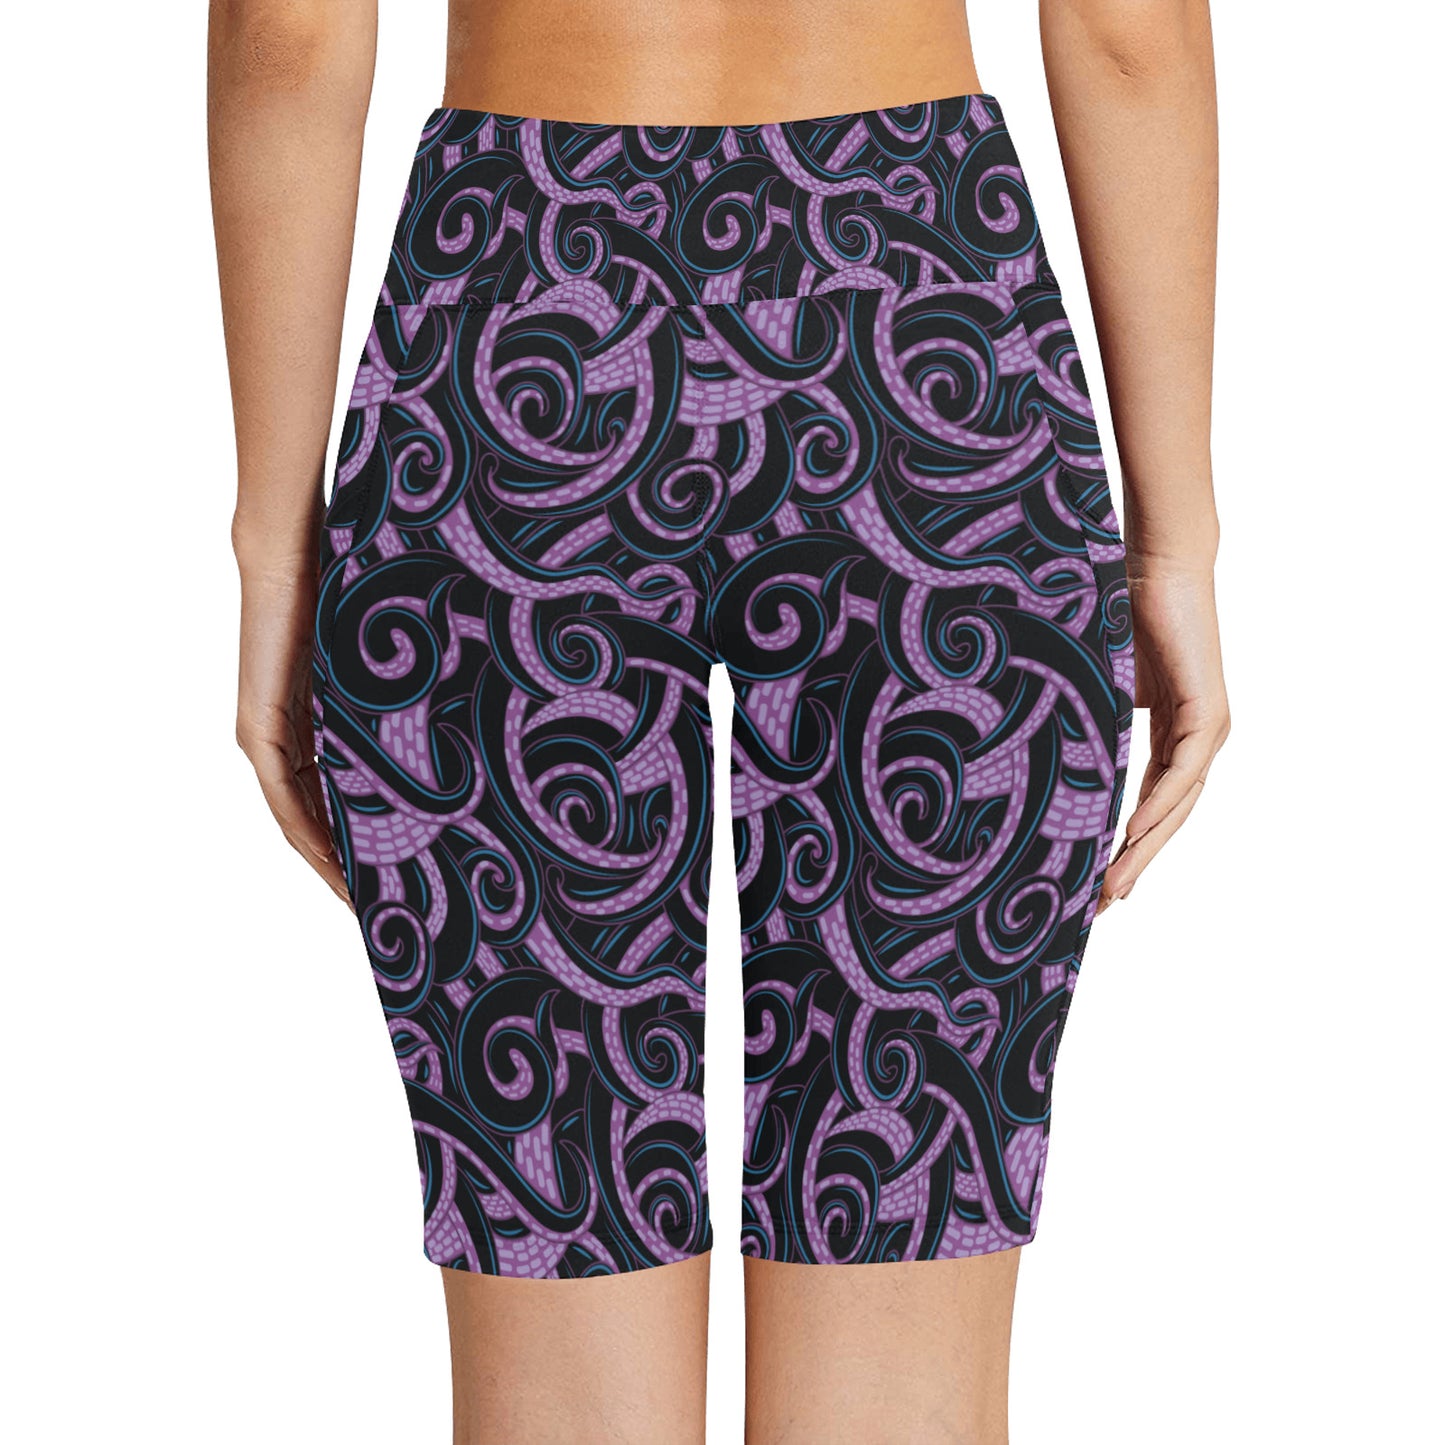 Ursula Tentacles Women's Athletic Workout Half Tights Leggings With Side Pockets